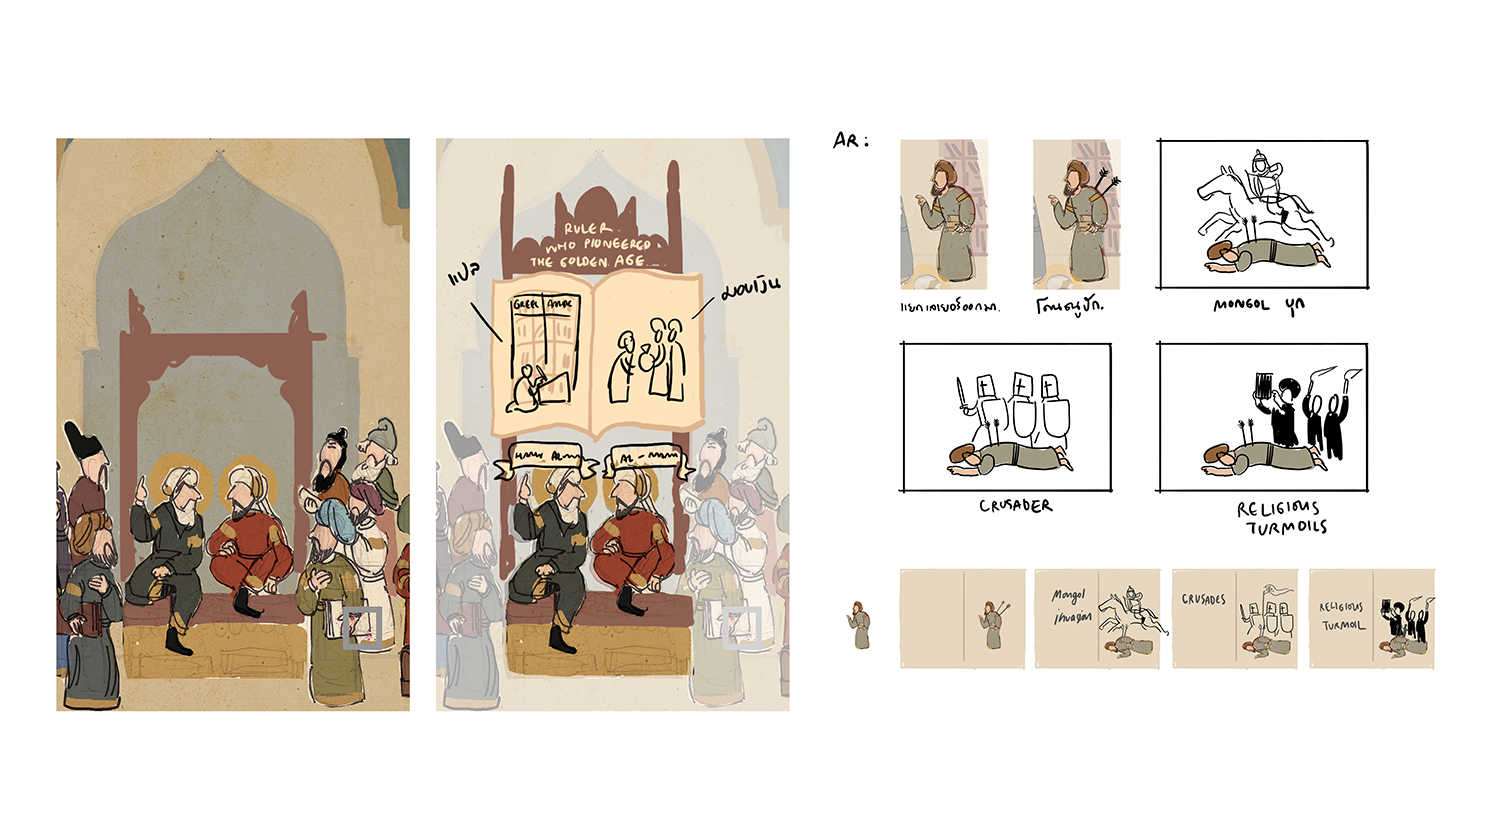  Animation storyboard for the beginning of the golden age (Left) and the end of the golden age (Right) 